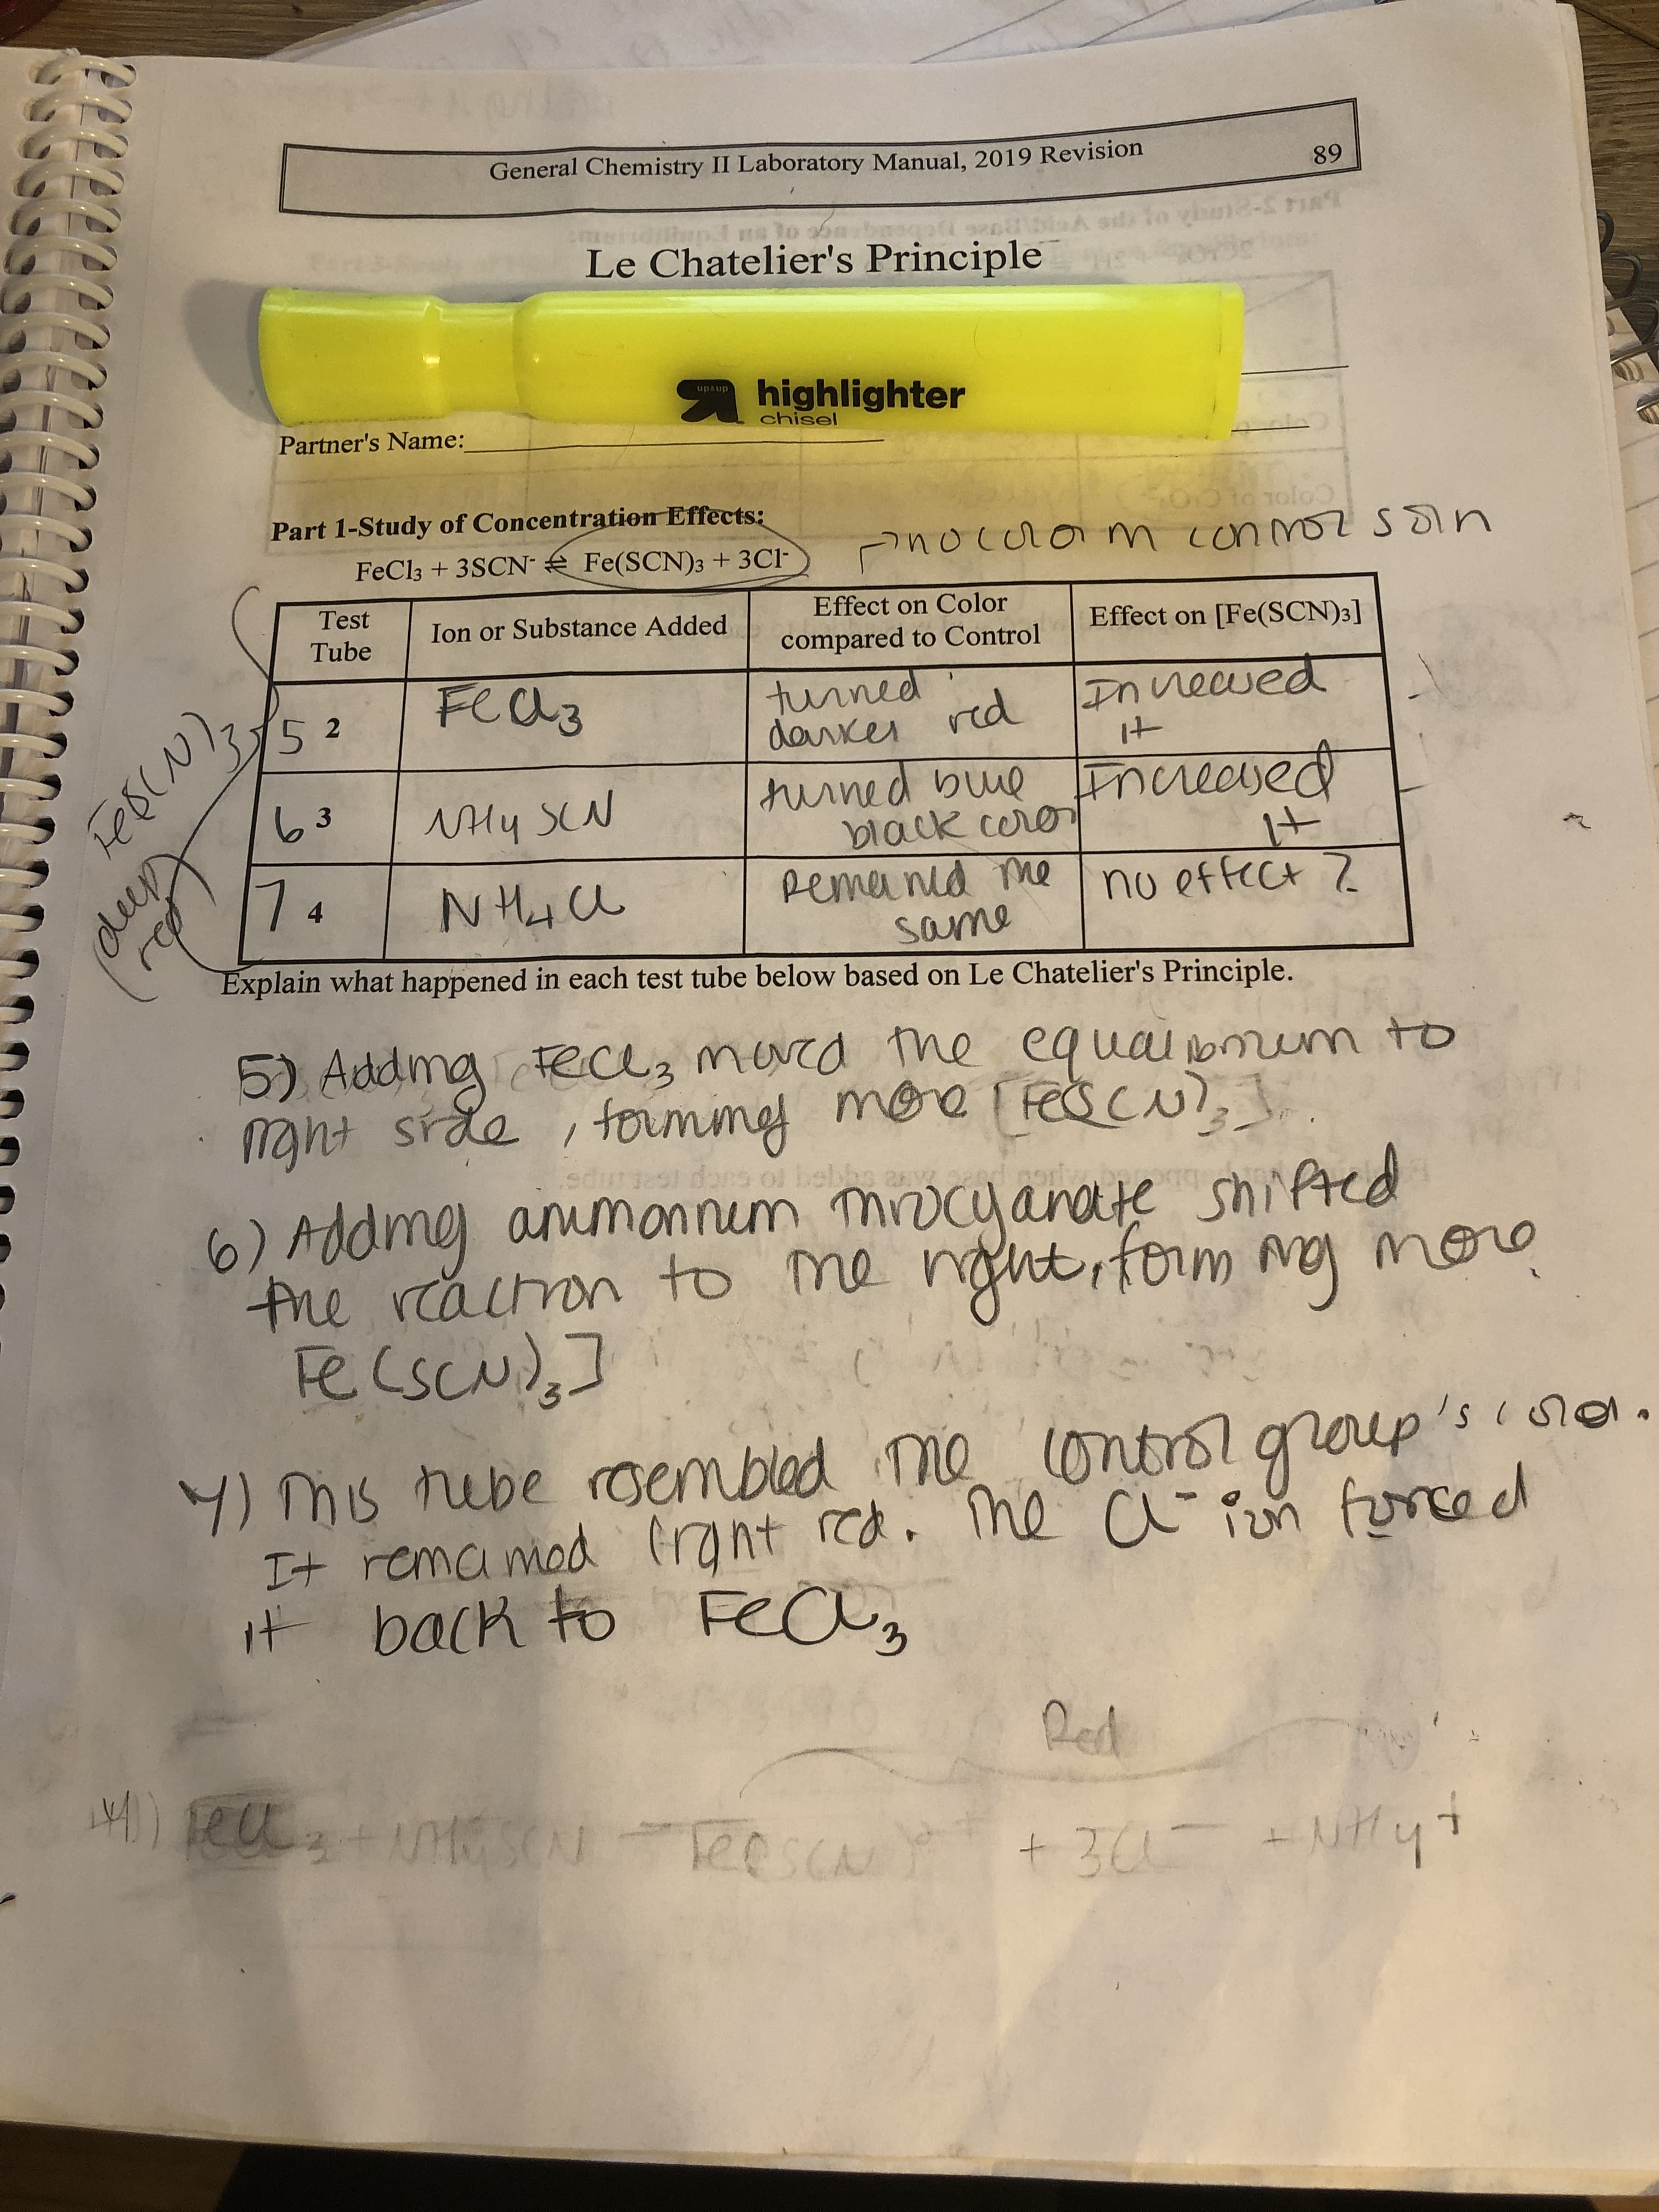 General Chemistry II Laboratory Manual, 2019 Revision
89
emeiidiliapI ns to
Le Chatelier's Principle
A highlighter
upaup
chisel
Partner's Name:
Part 1-Study of Concentration Effects:
Oto Tolo
FeCl3 + 3SCN Fe(SCN)3 +3Cl-
nocuom conmo sSin
Test
Effect on Color
Tube
Ion or Substance Added
Effect on [Fe(SCN)3]
compared to Control
Fea3
turned
daixer red Innewed
turned buue Fnciedsed
black coro
Remanid me
same
It
63
NHy SN
7.
It
no effect Z
4
Explain what happened in each test tube below based on Le Chatelier's Principle.
5) Addmg teclz merrd the equai bmum to
maht srde , fouming more fescu, .
edutesl dors oi bebbs an
me ammannem mirocy anate shifted
the racon to me nght, fom my more
recscud,]
6)Add
dmg
(ontrolgroup"
p's
4) mis rebe roembled me
It rema mod Crant red. ihe a Pen force d
it back to FeCUy
Red
)eu+MG SCU eeSCA
TeescaN
+31- +NHyt
+ 305
lep
FescN),
